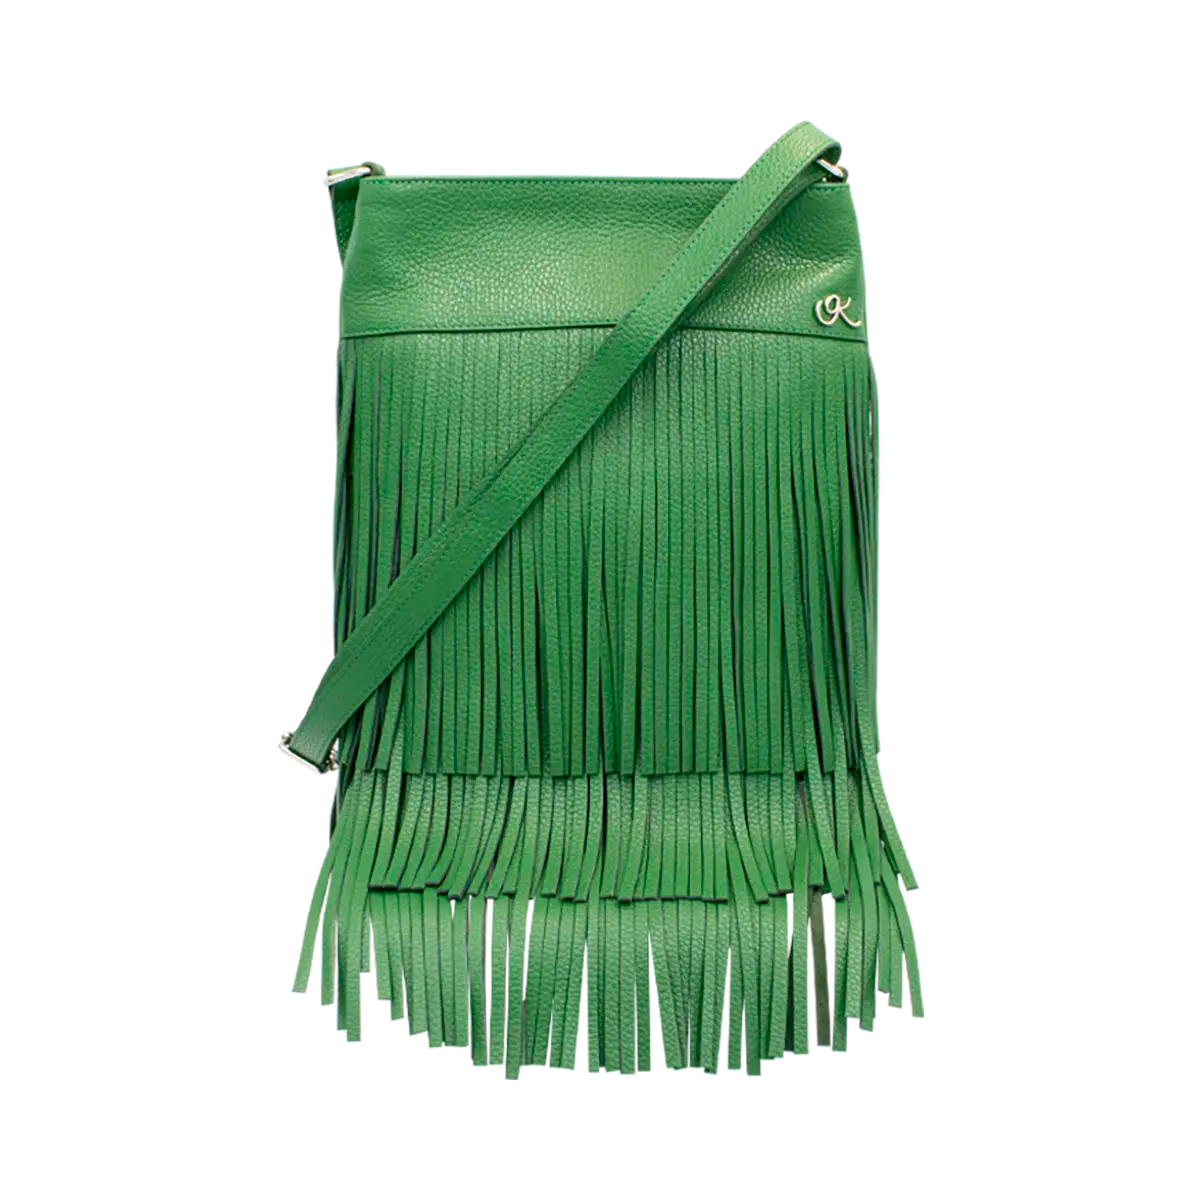 green leather shoulder bag with 3 layers of fringe. Fashion accessories, for women in San Diego, CA.